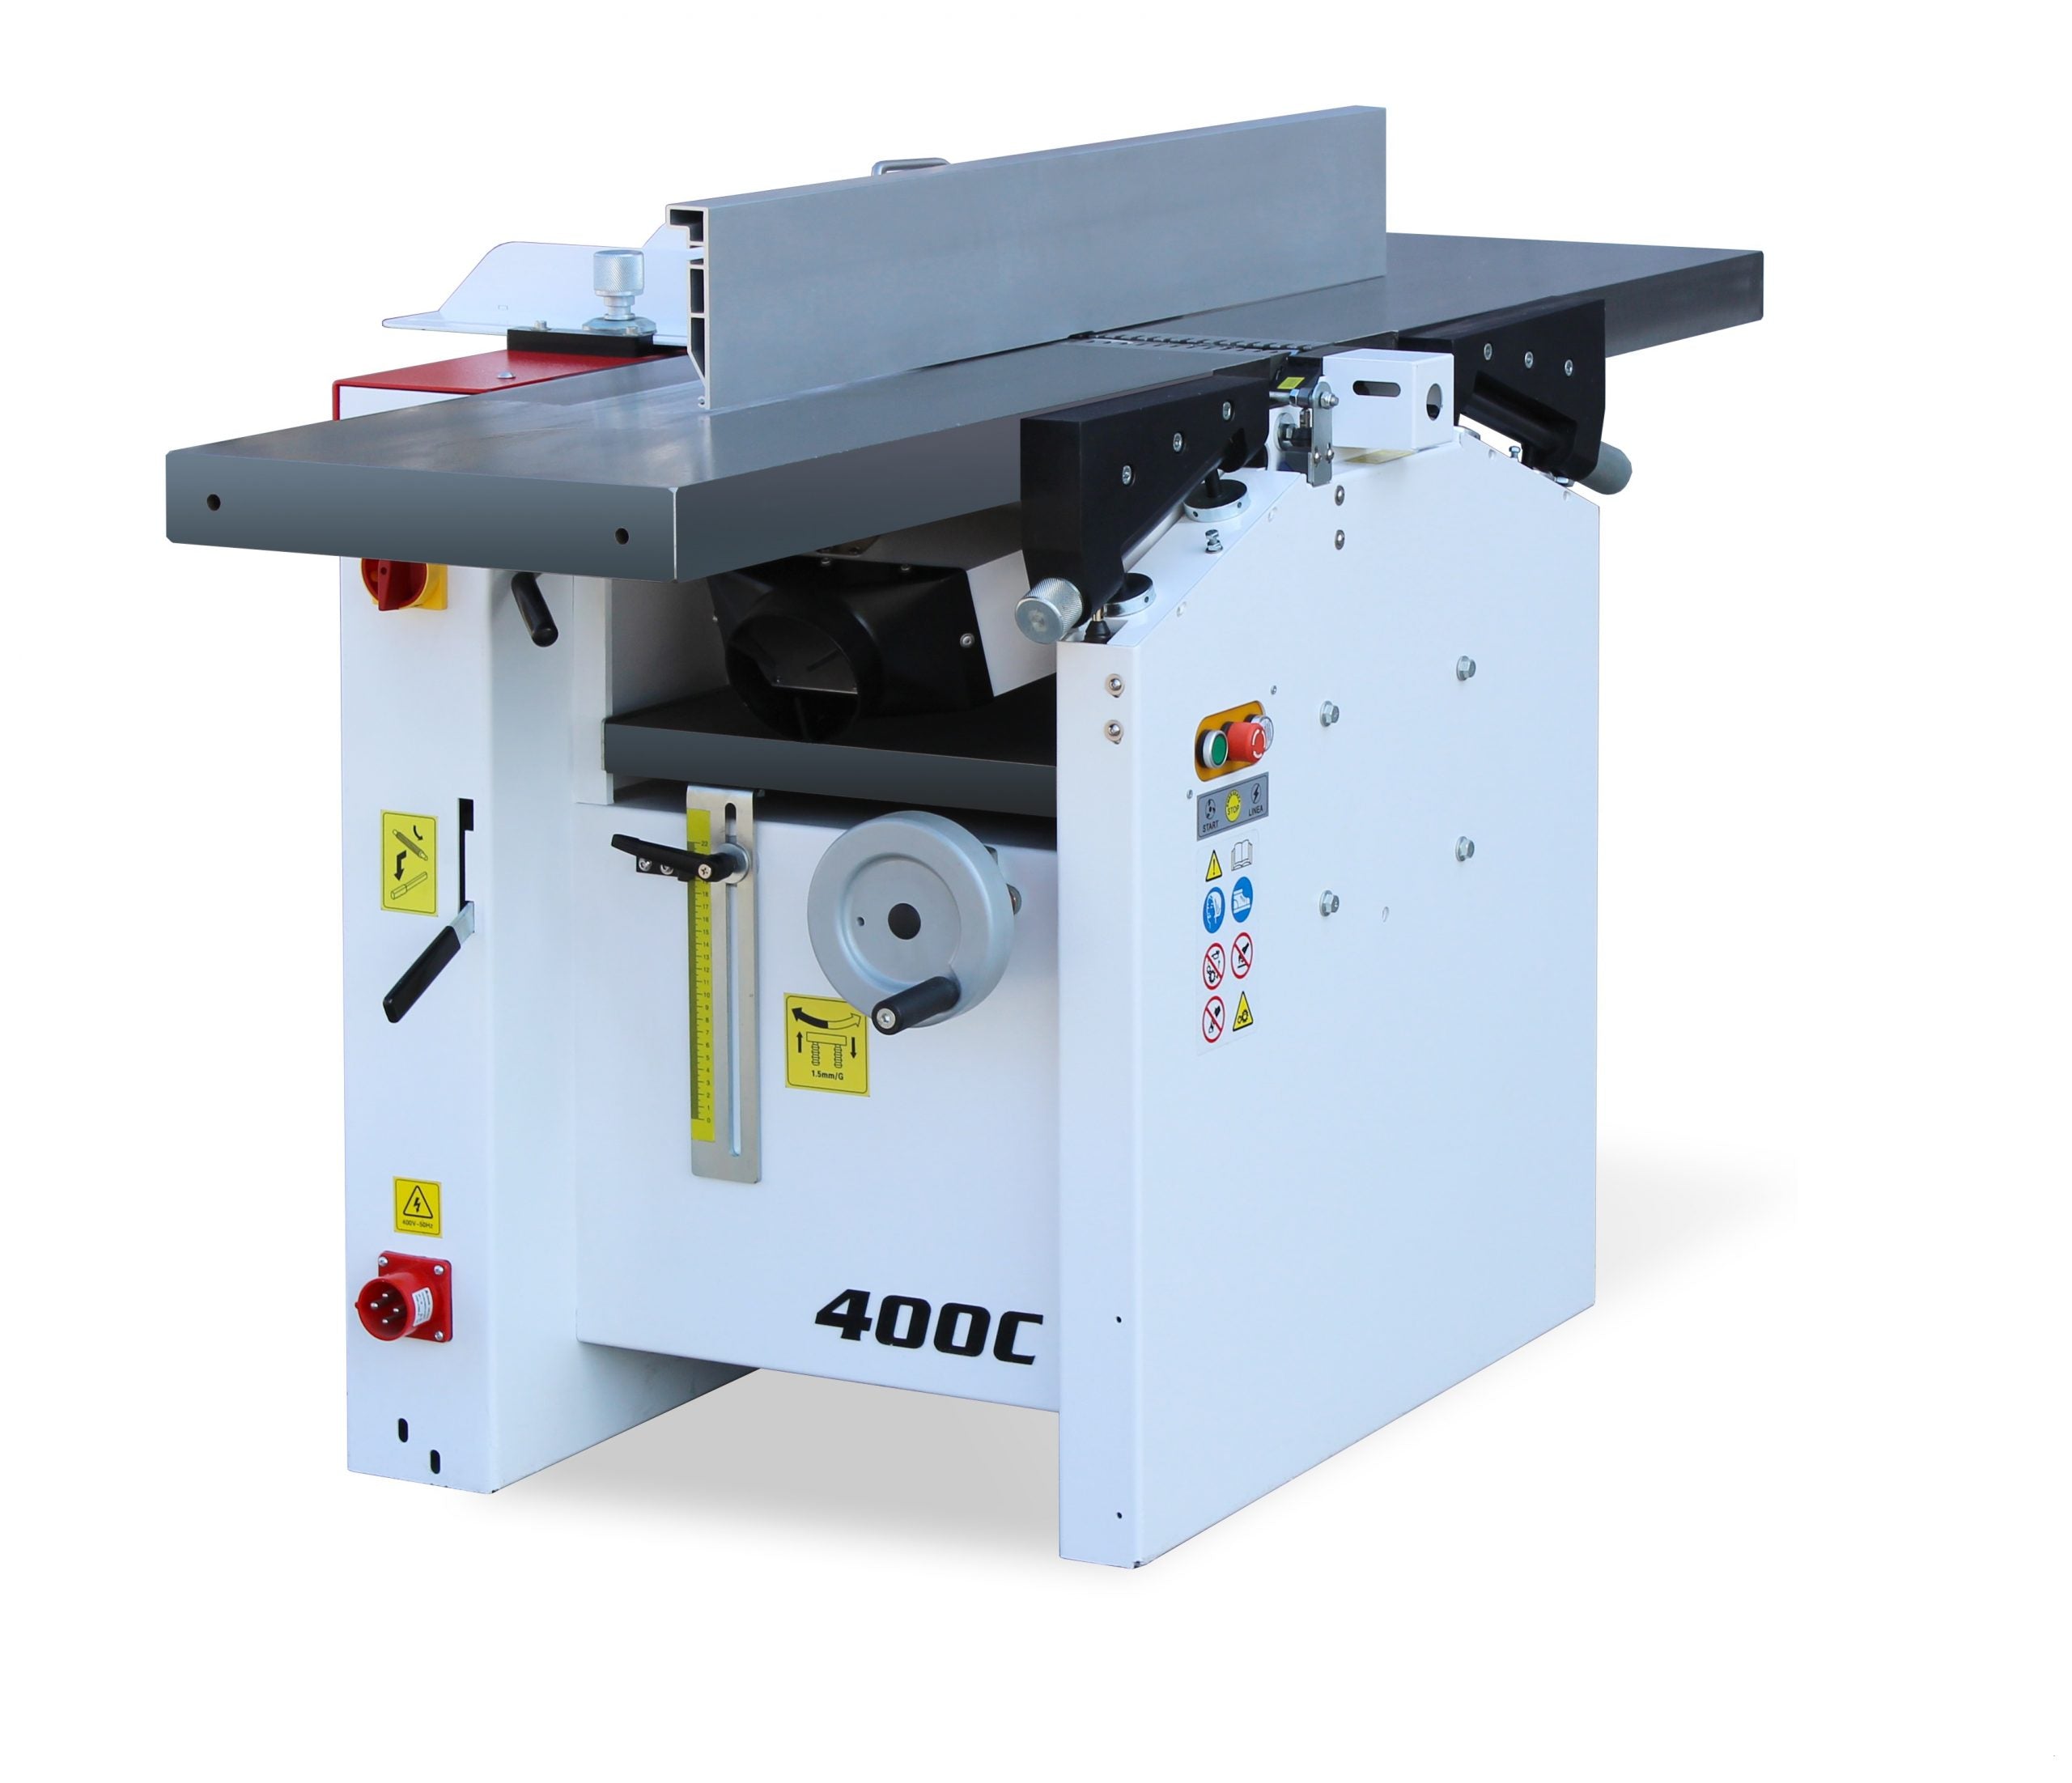 410mm (16") Italian Designed Professional Combination Planer & Thicknesser with Spiral Head Cutter Block 400C 240V by Sicar